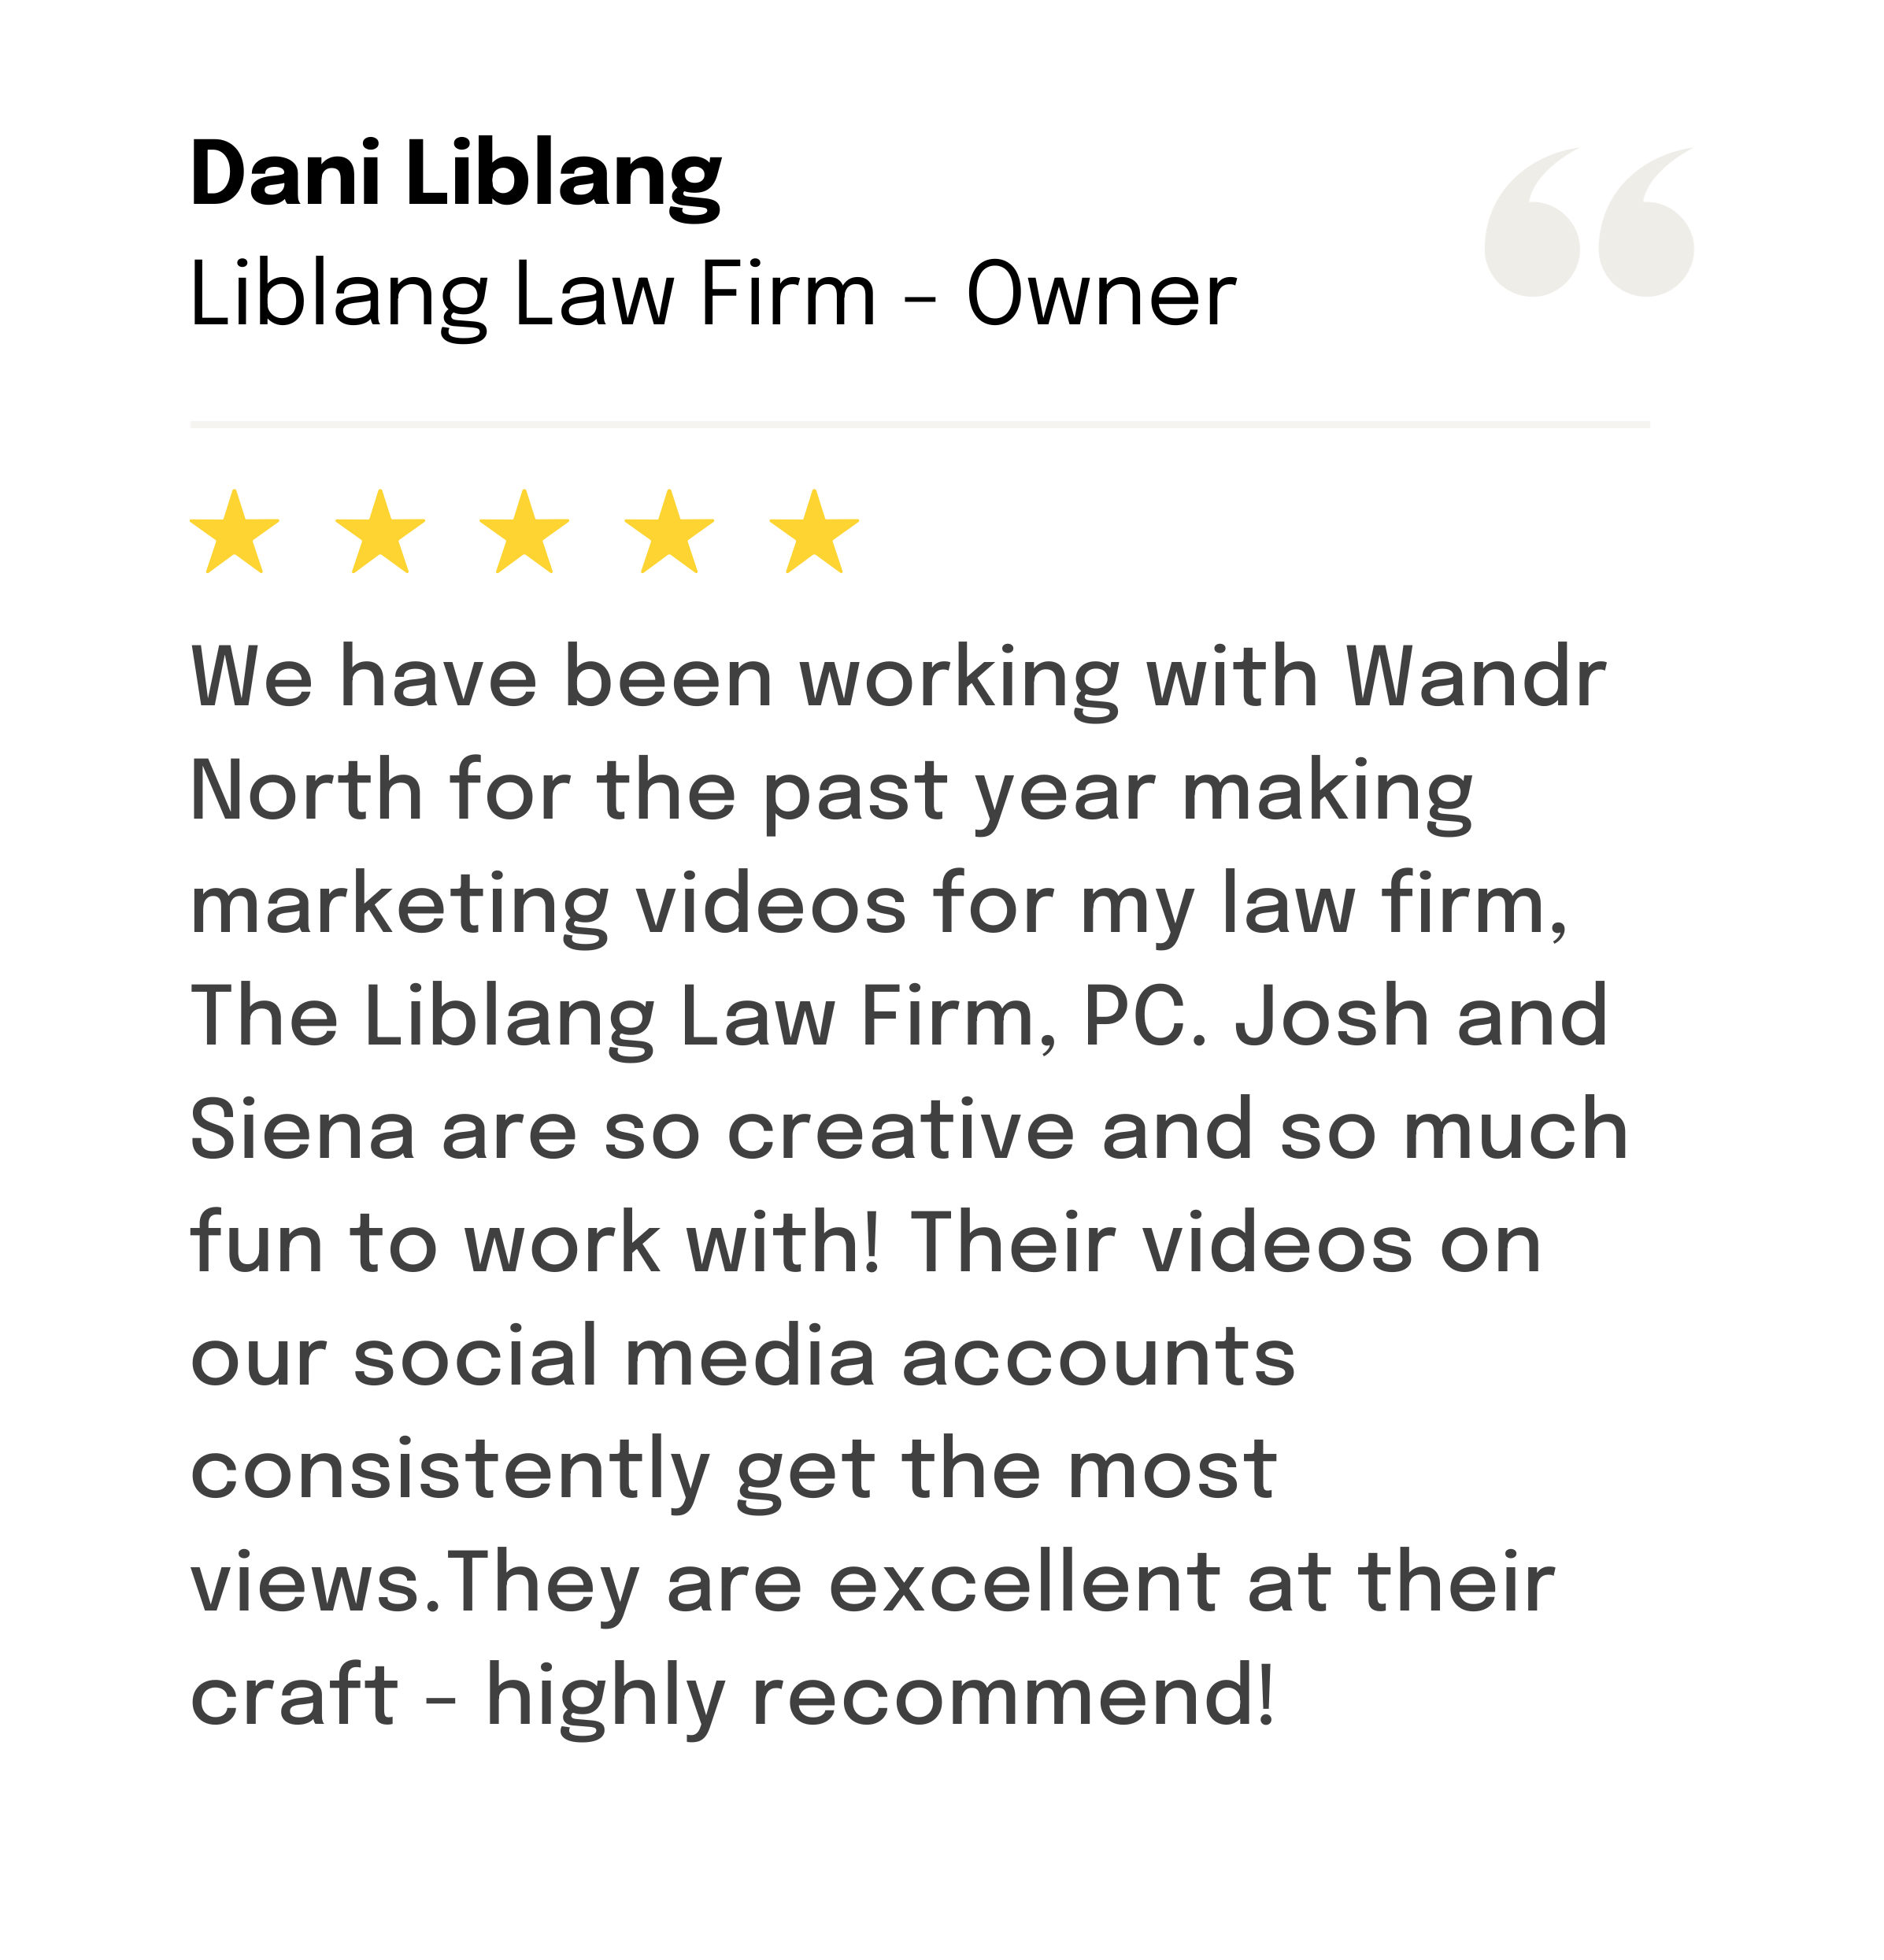 Liblang Law Firm writes a 5-star review to Wandr North for their social media videography services.